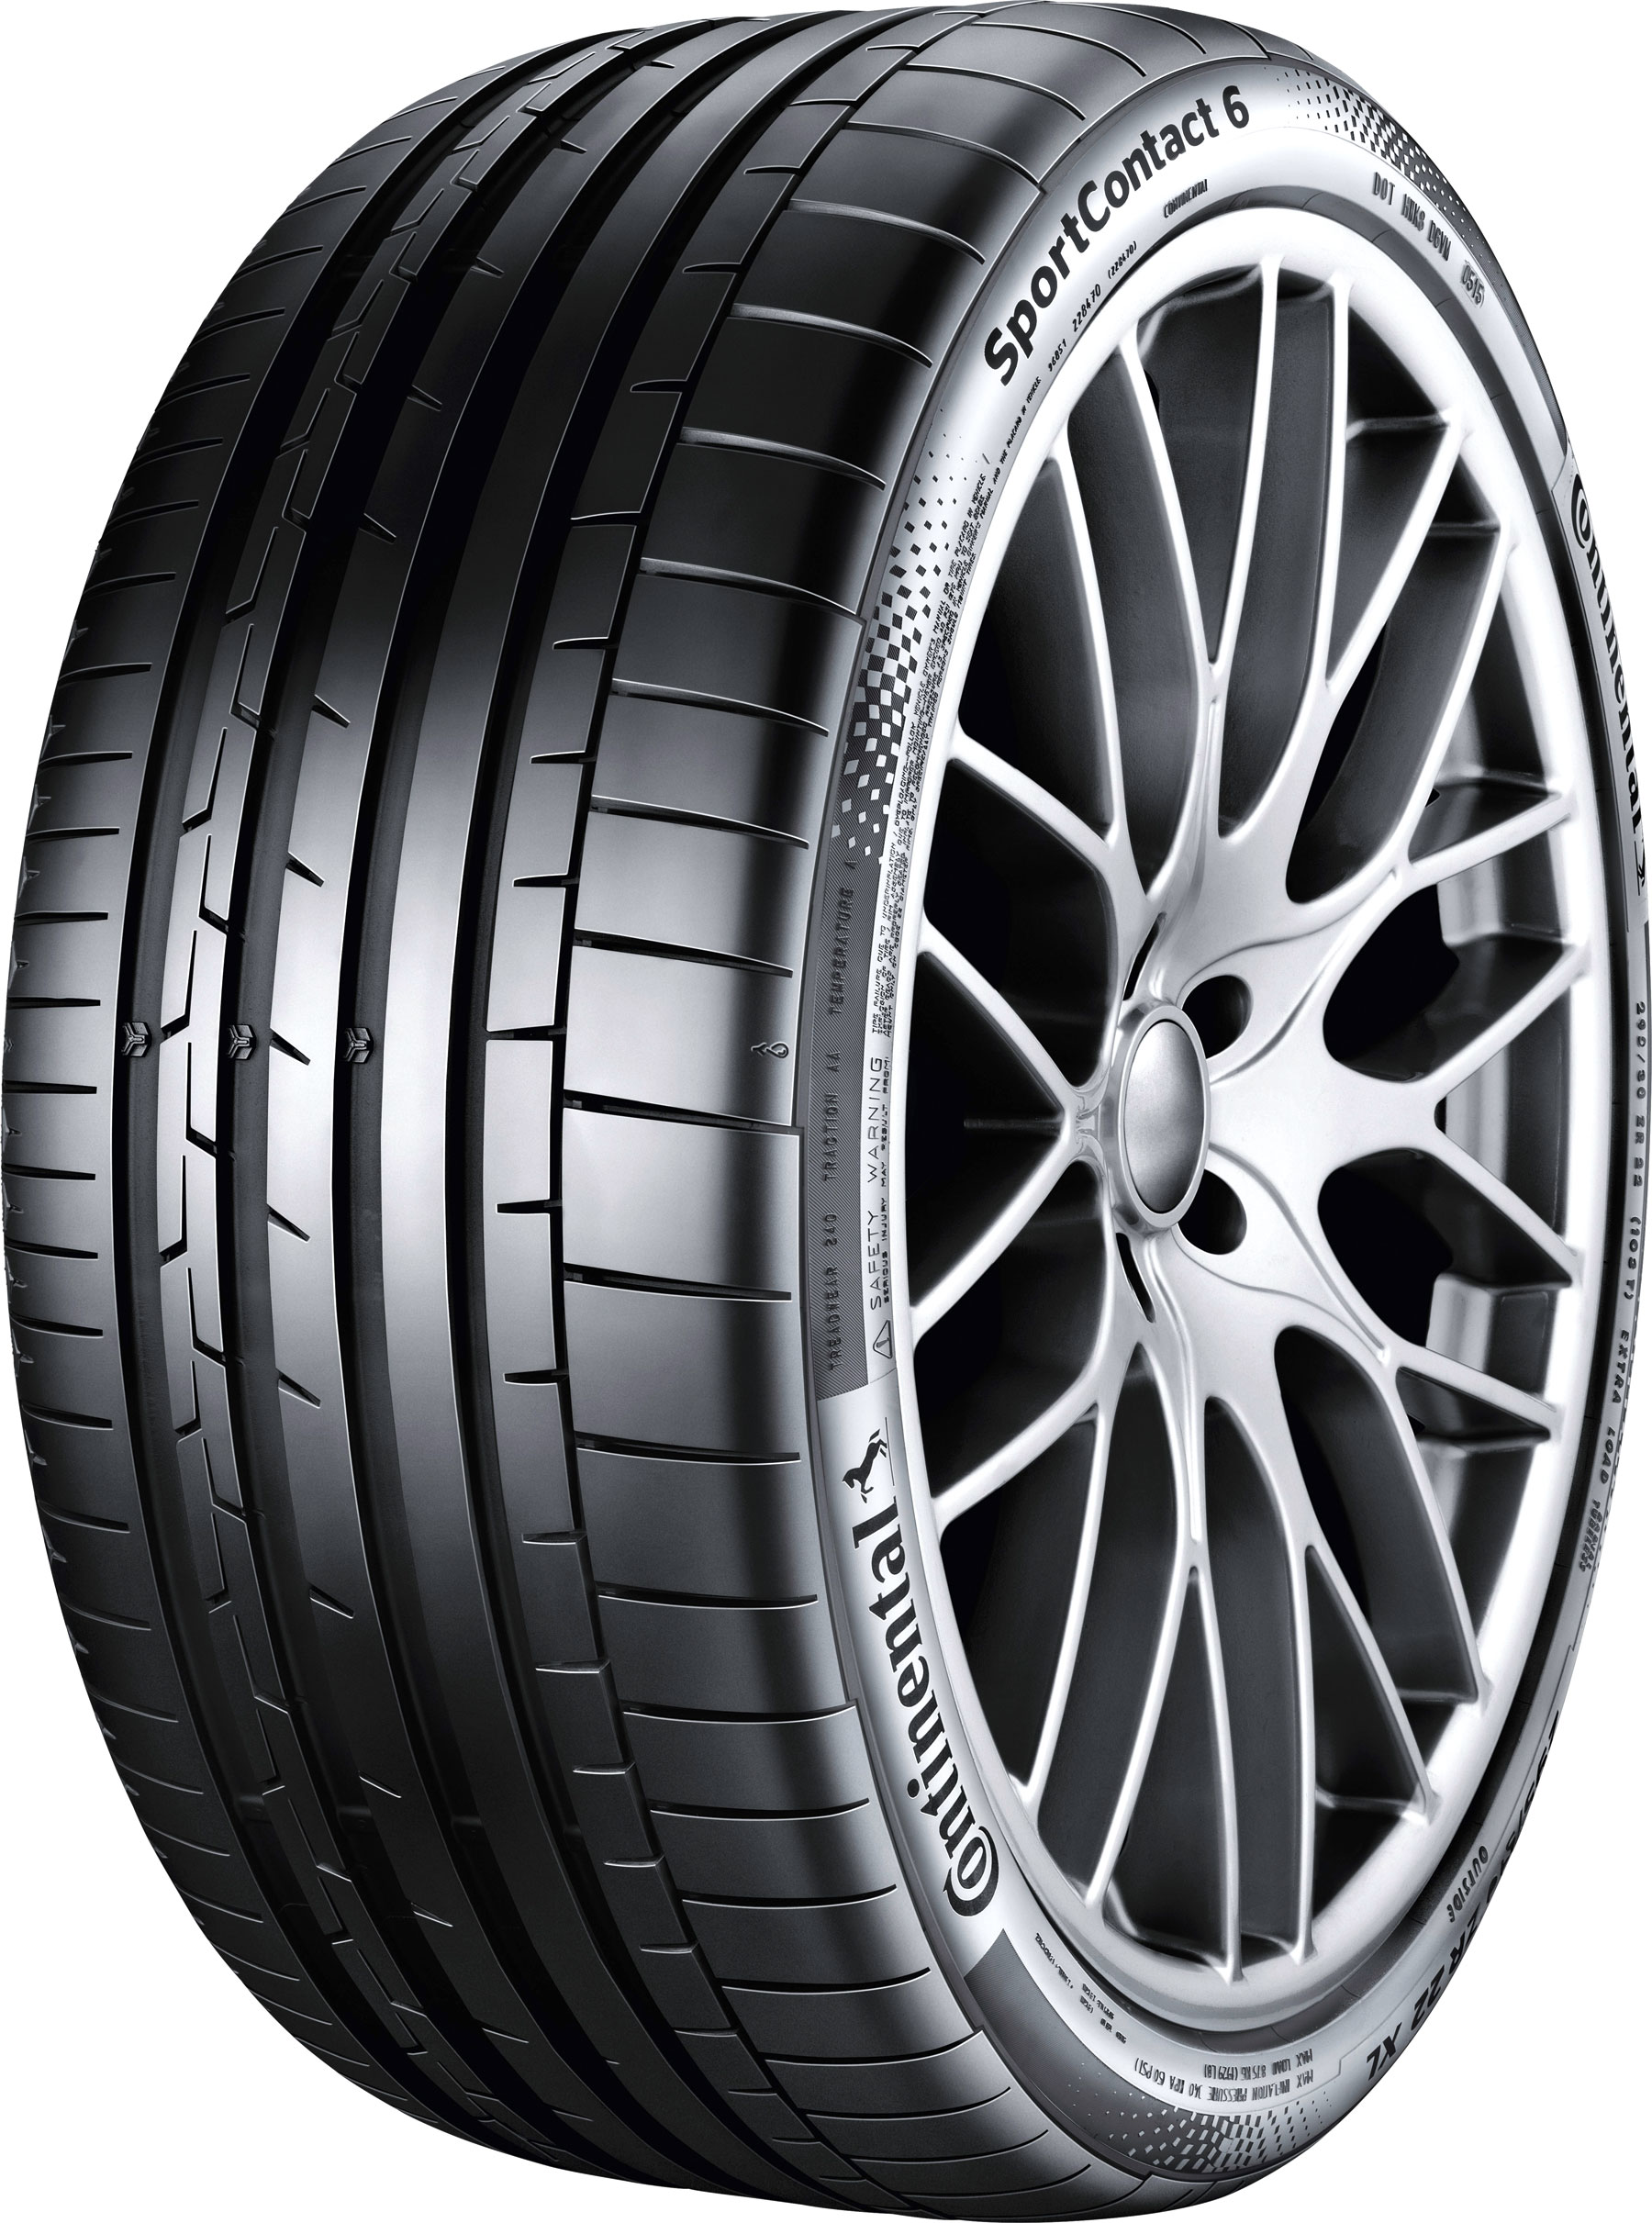 325/35 R22 Continental SportContact 6 FR MO1 114 Y